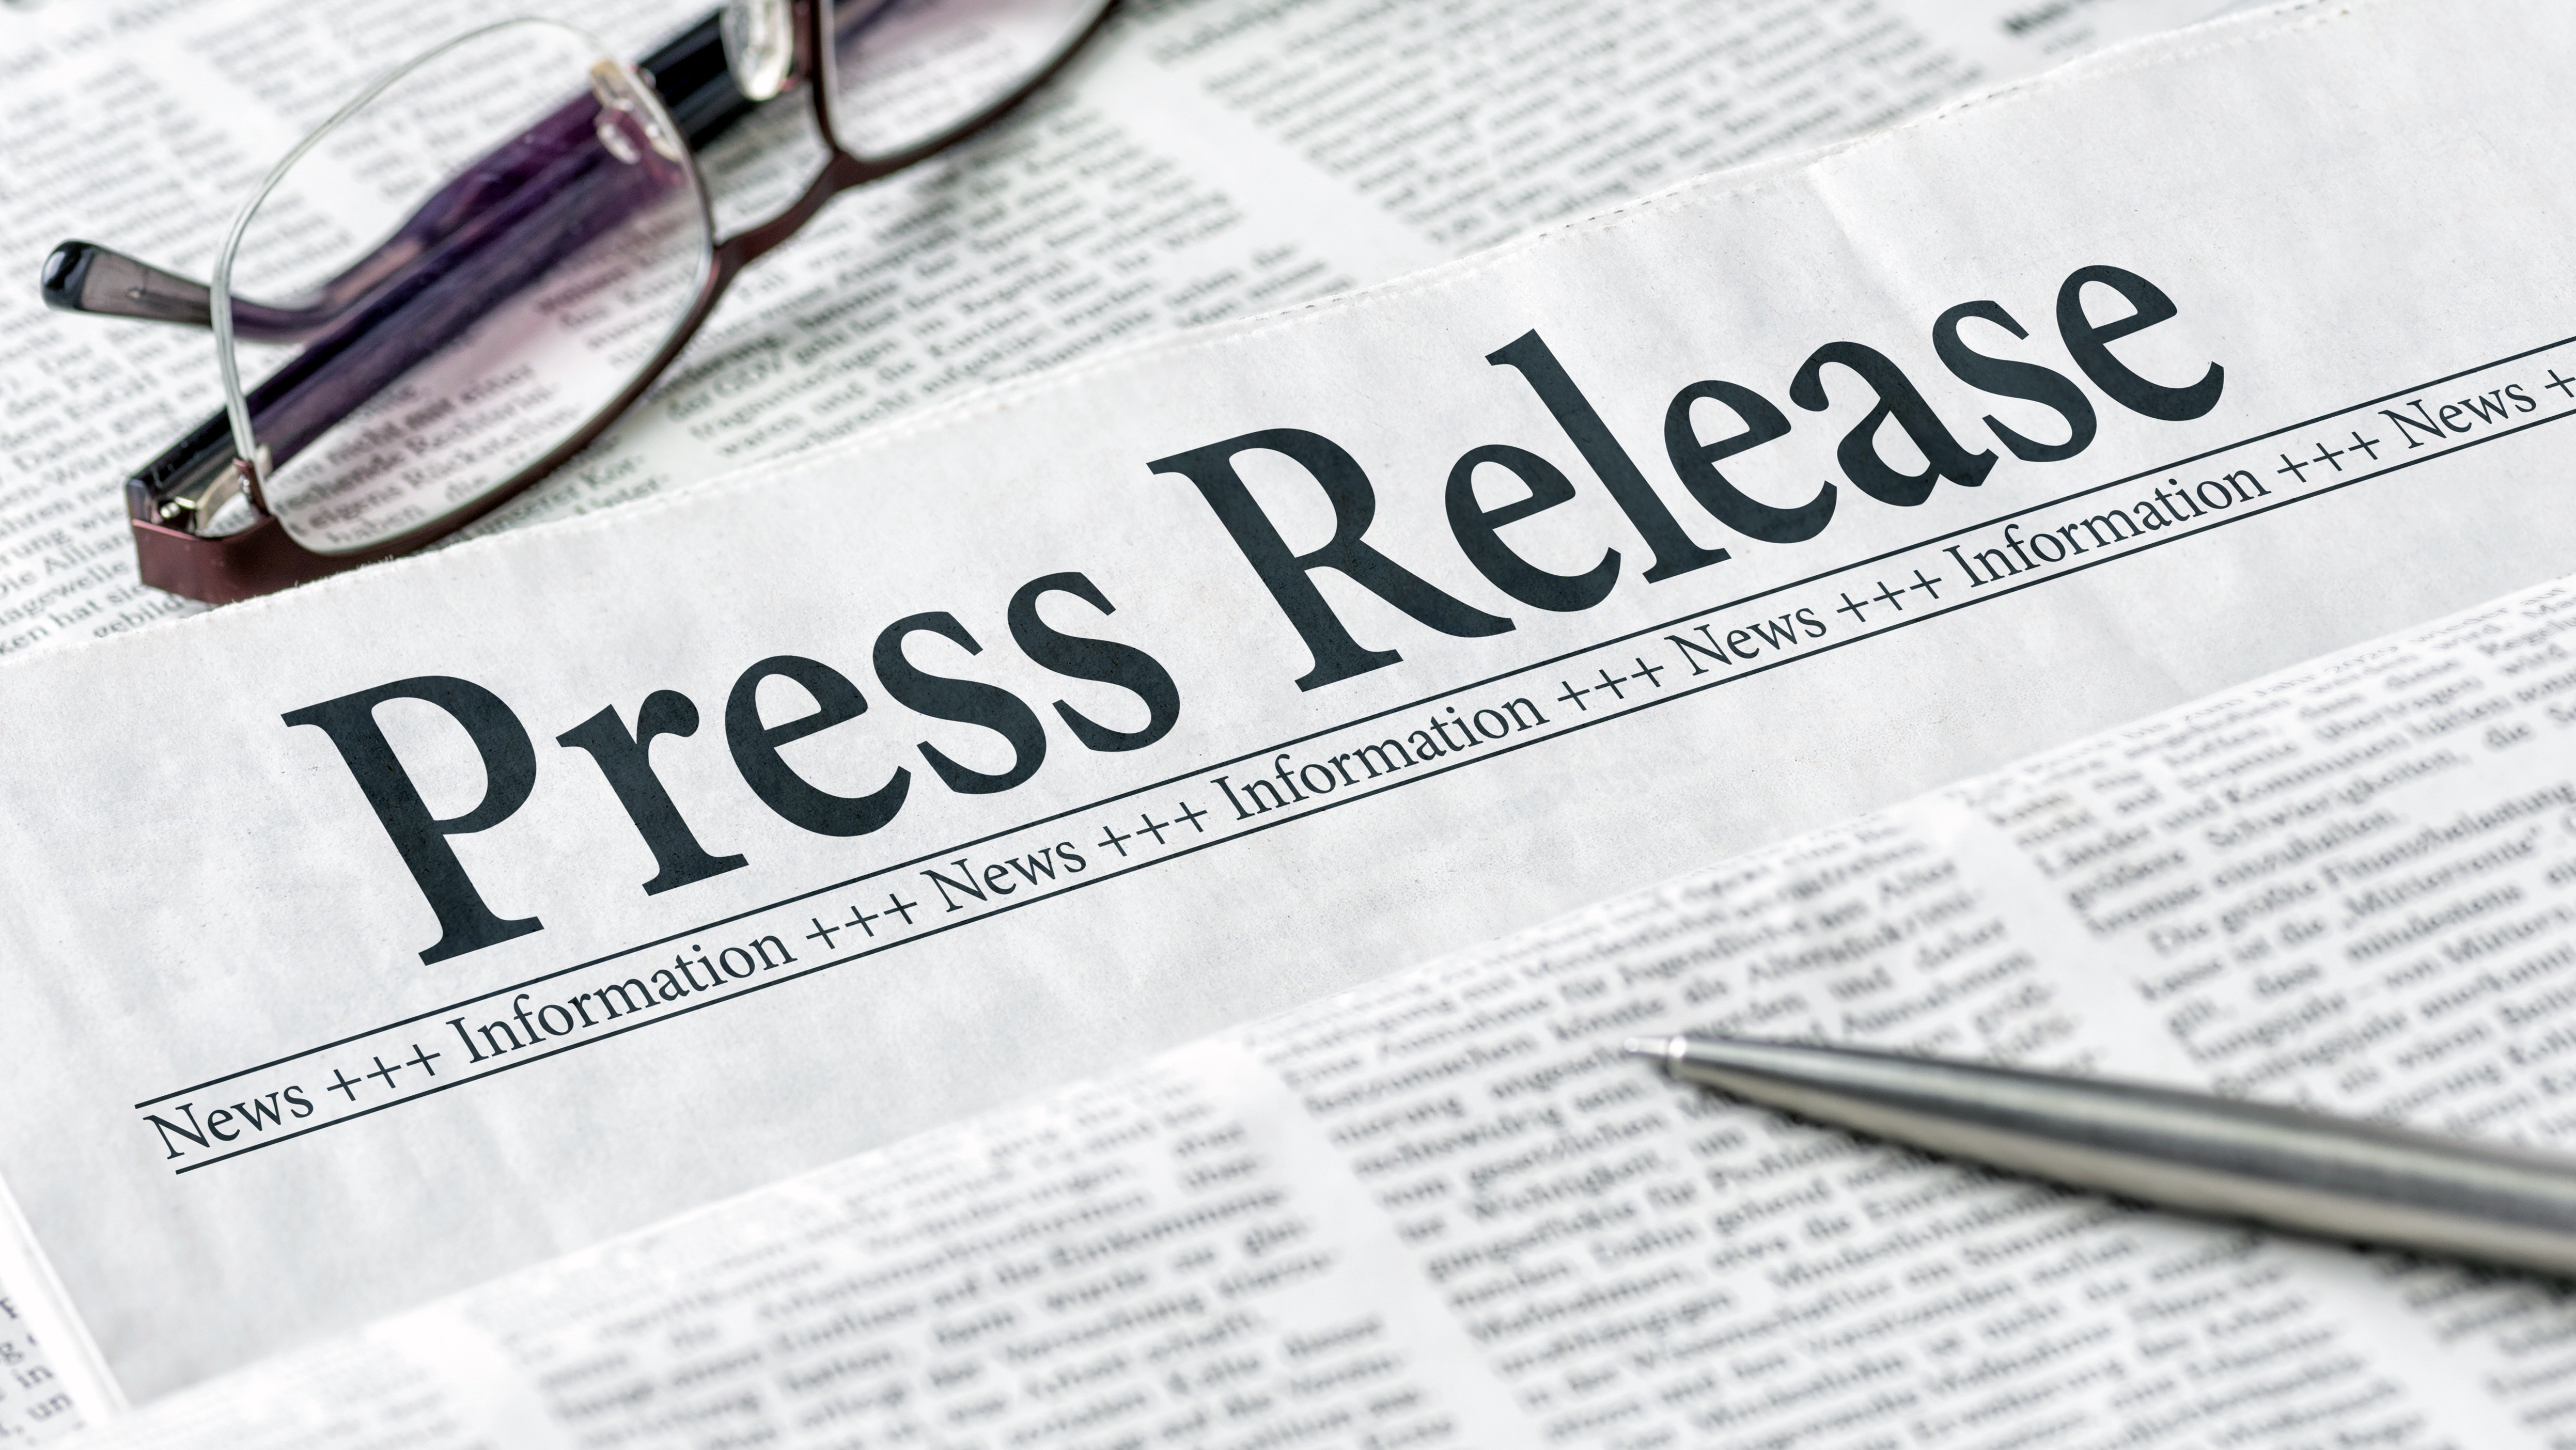 Everything You Wanted to Know about Press Release Format but Were Too Afraid to Ask